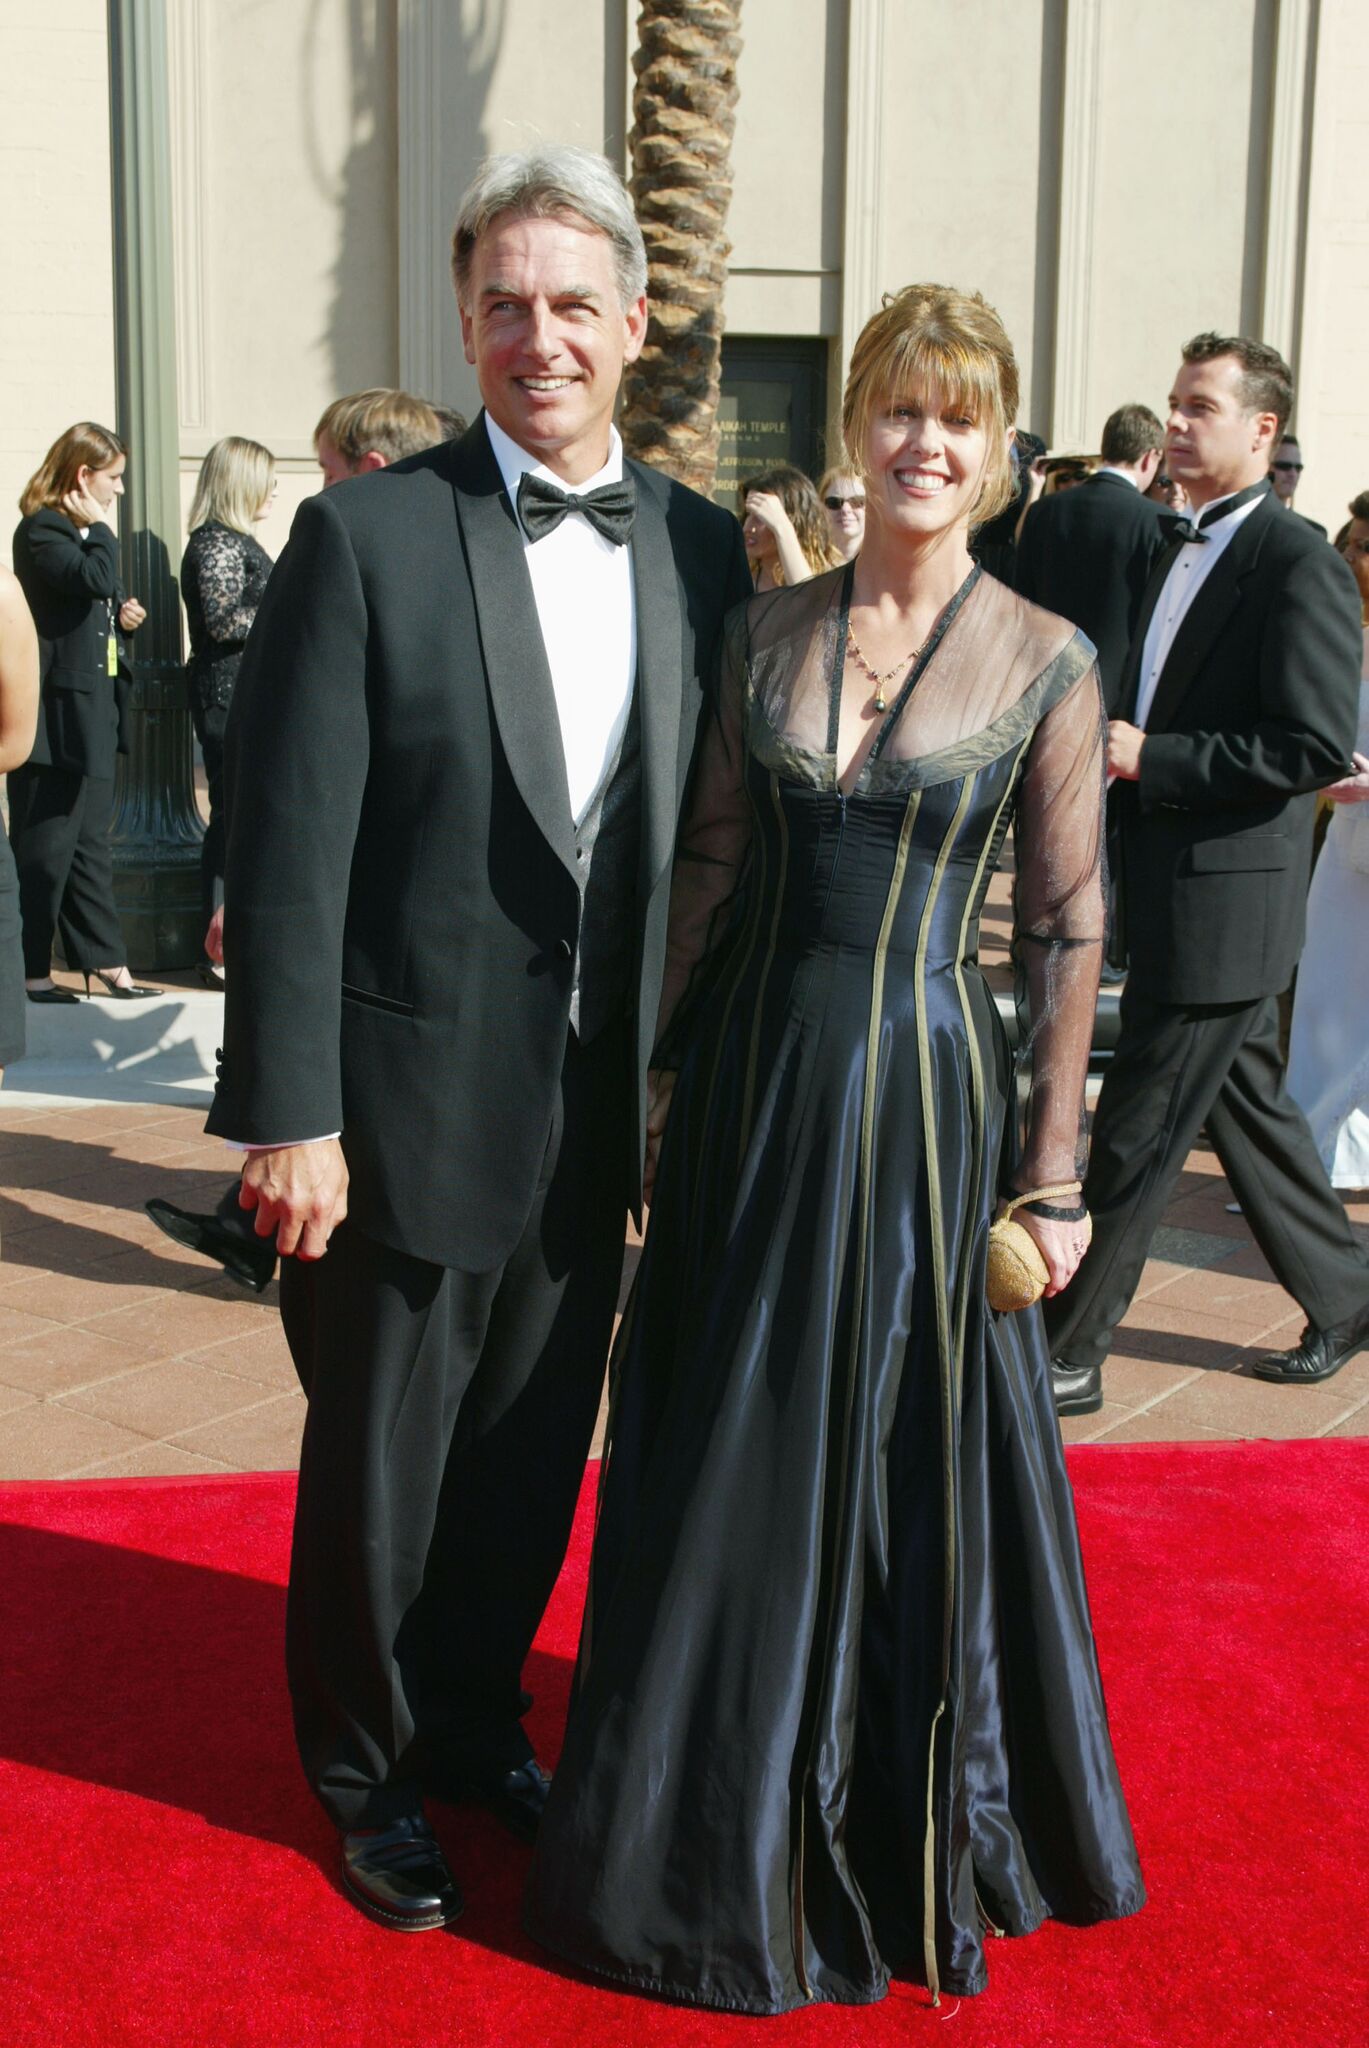 Mark Harmon and Pam Dawber during The 15th Annual People's Choice Awards at Disney Studios in Burbank, California, United States. | Photo: Getty Images